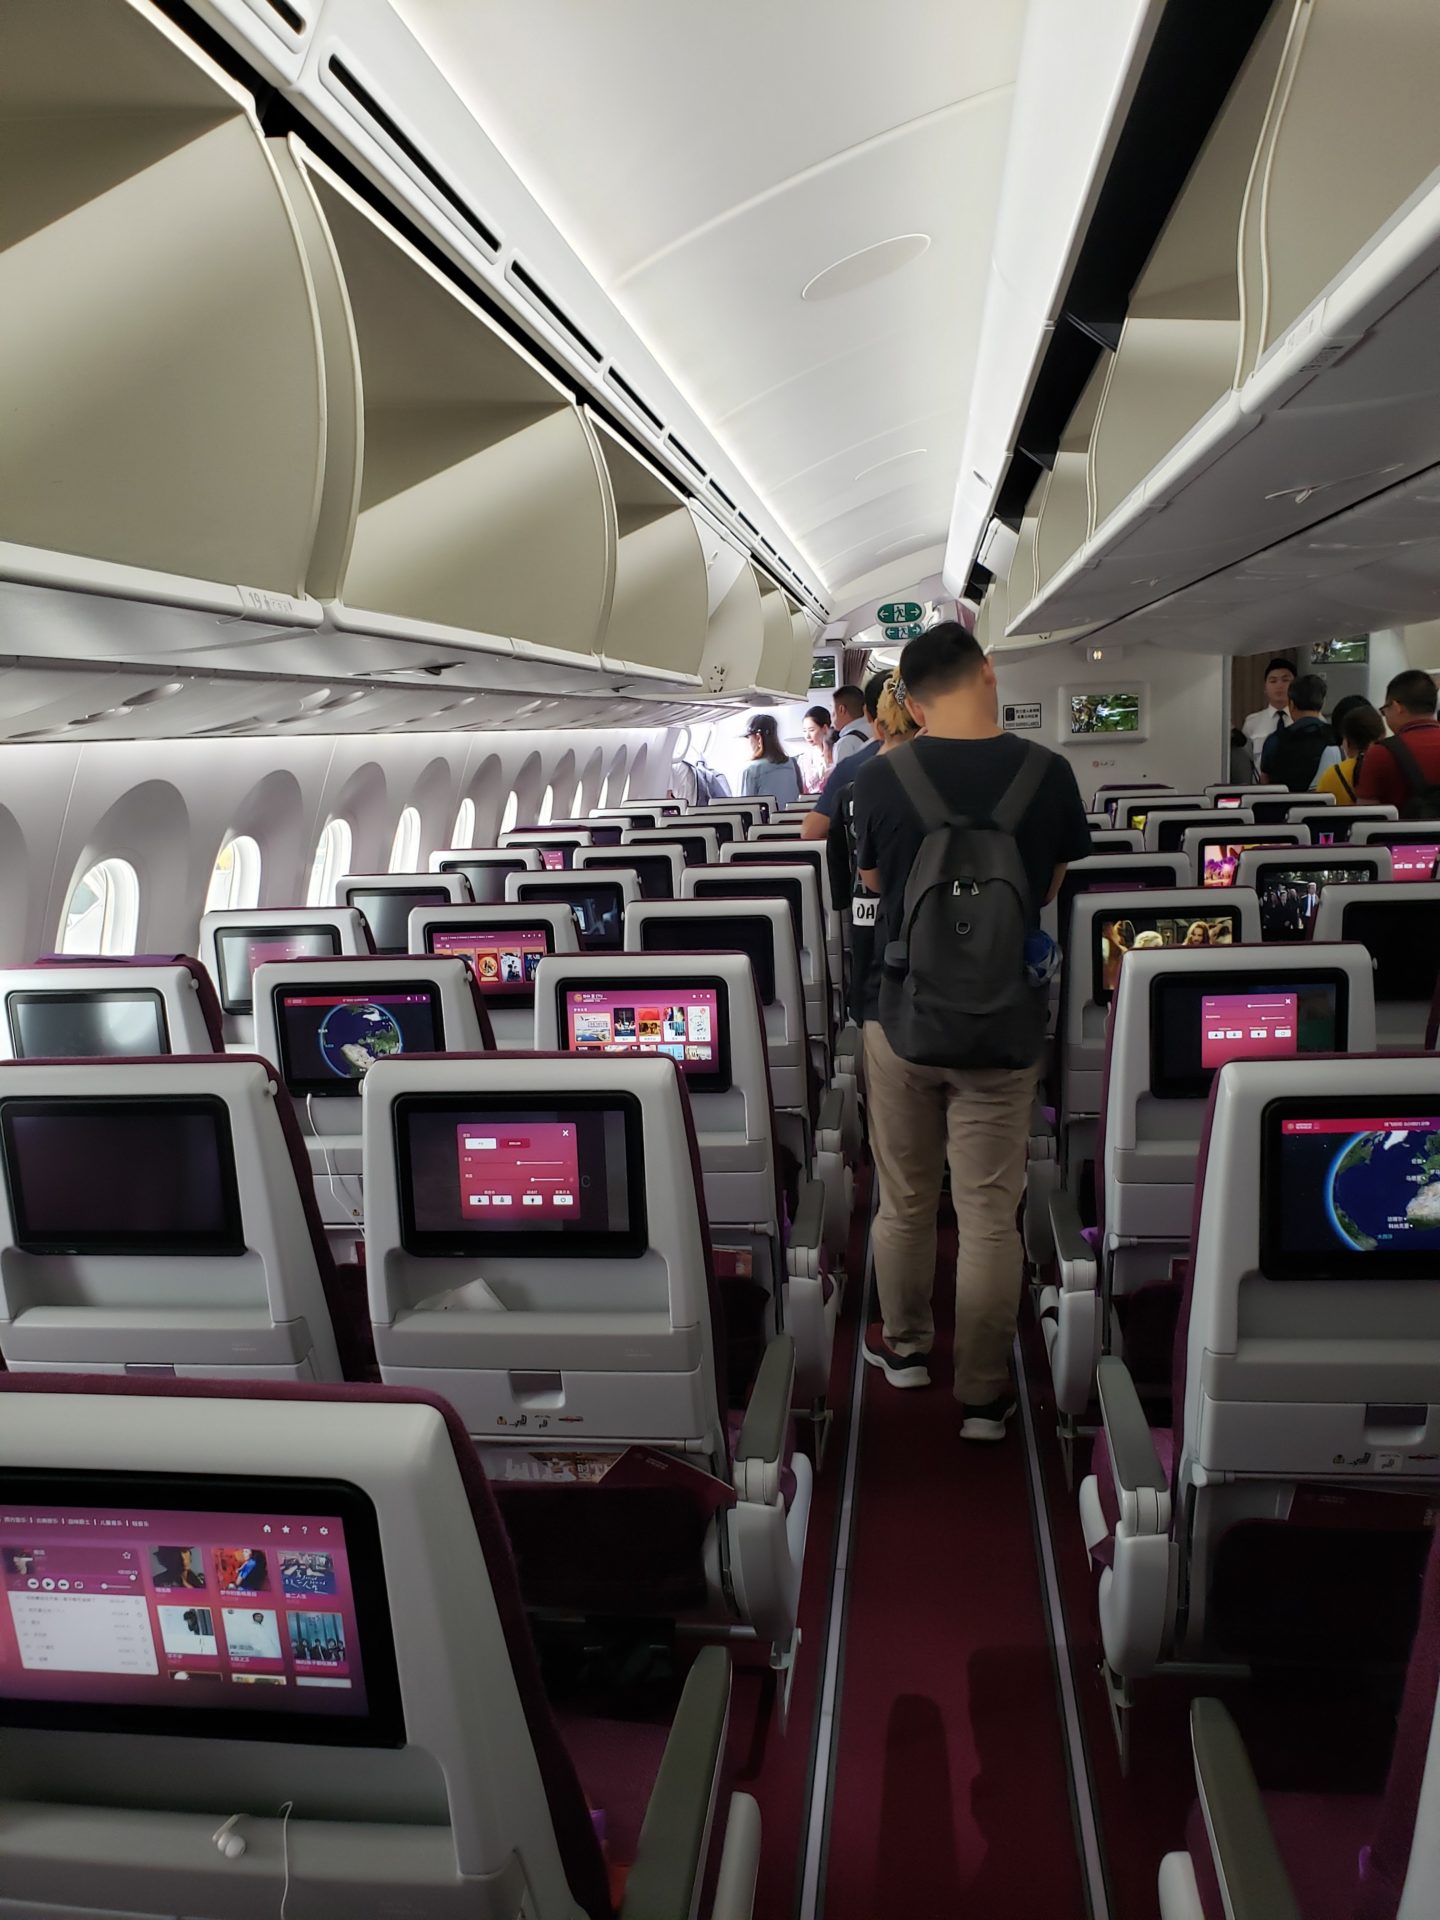 a man walking in an airplane with many monitors